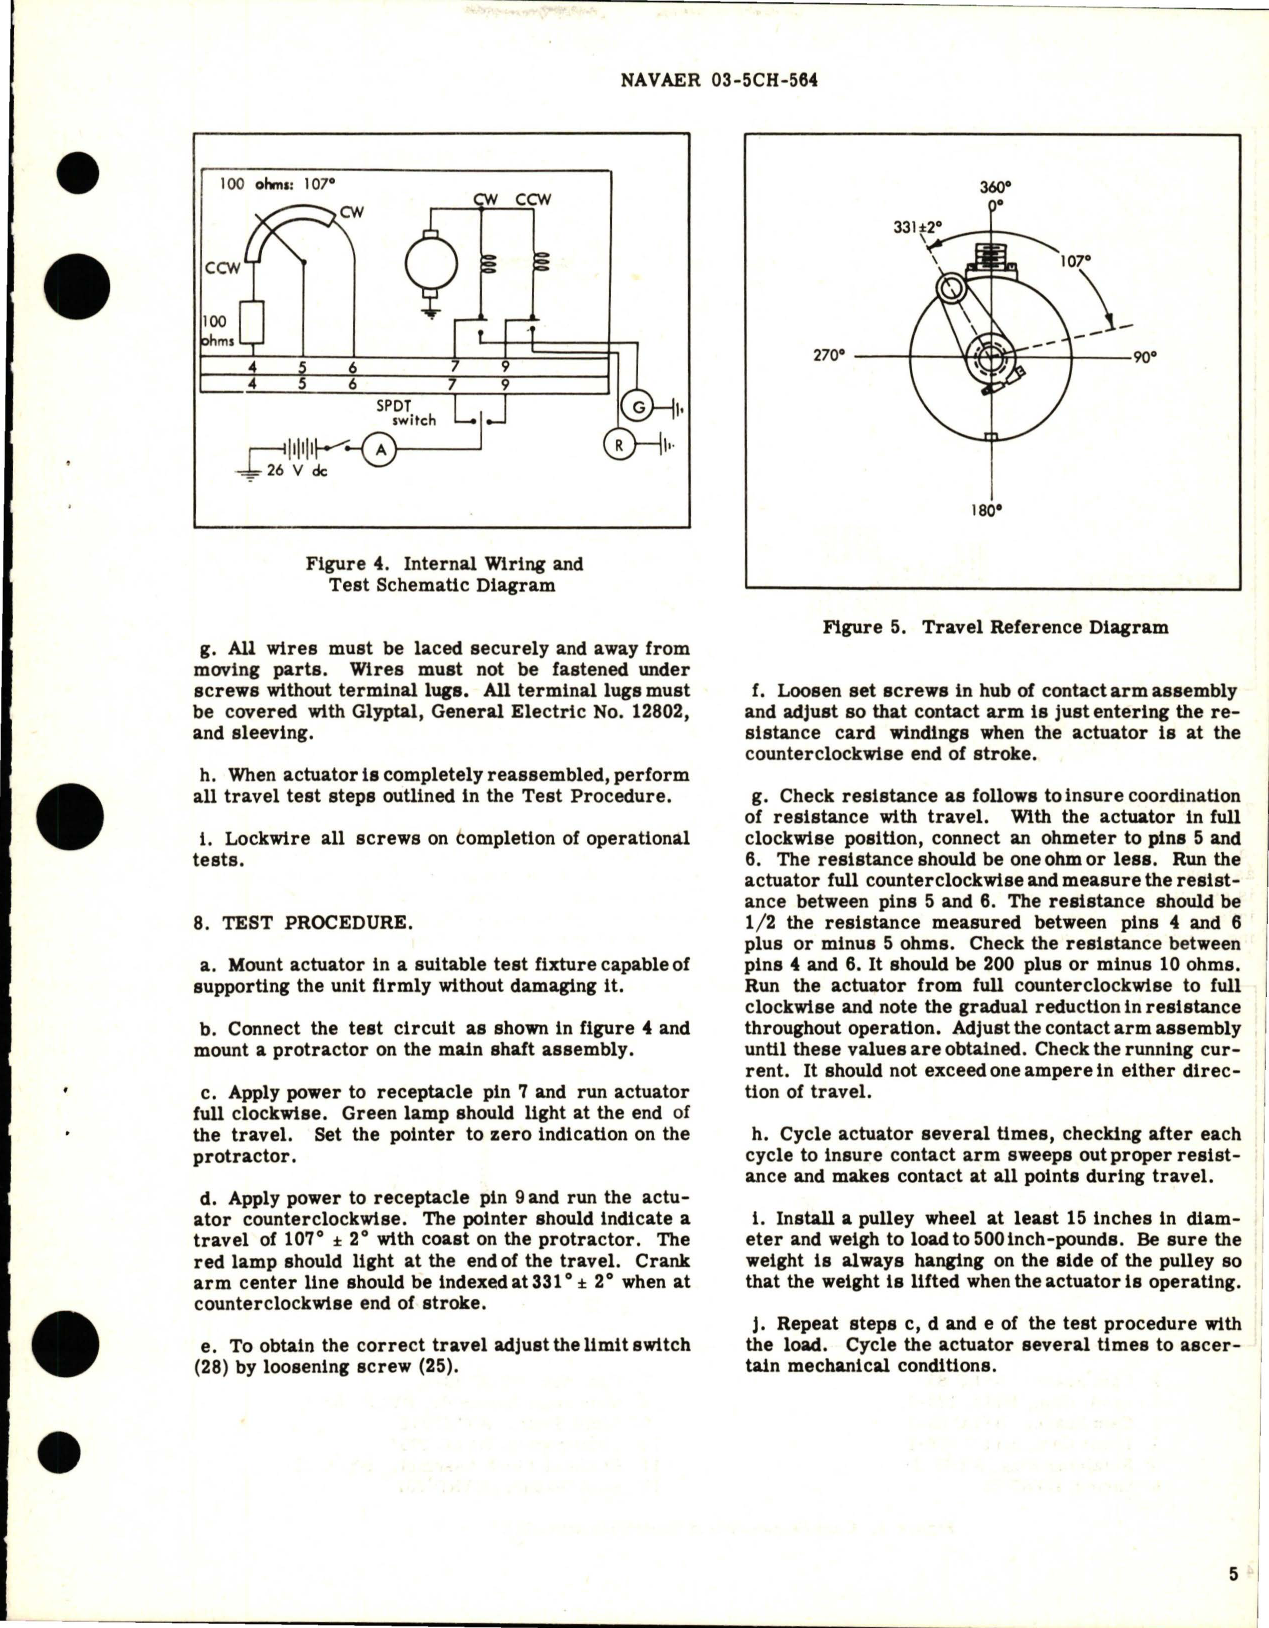 Sample page 5 from AirCorps Library document: Overhaul Instructions with Parts Breakdown for Rotary Actuator - BYLC 2254